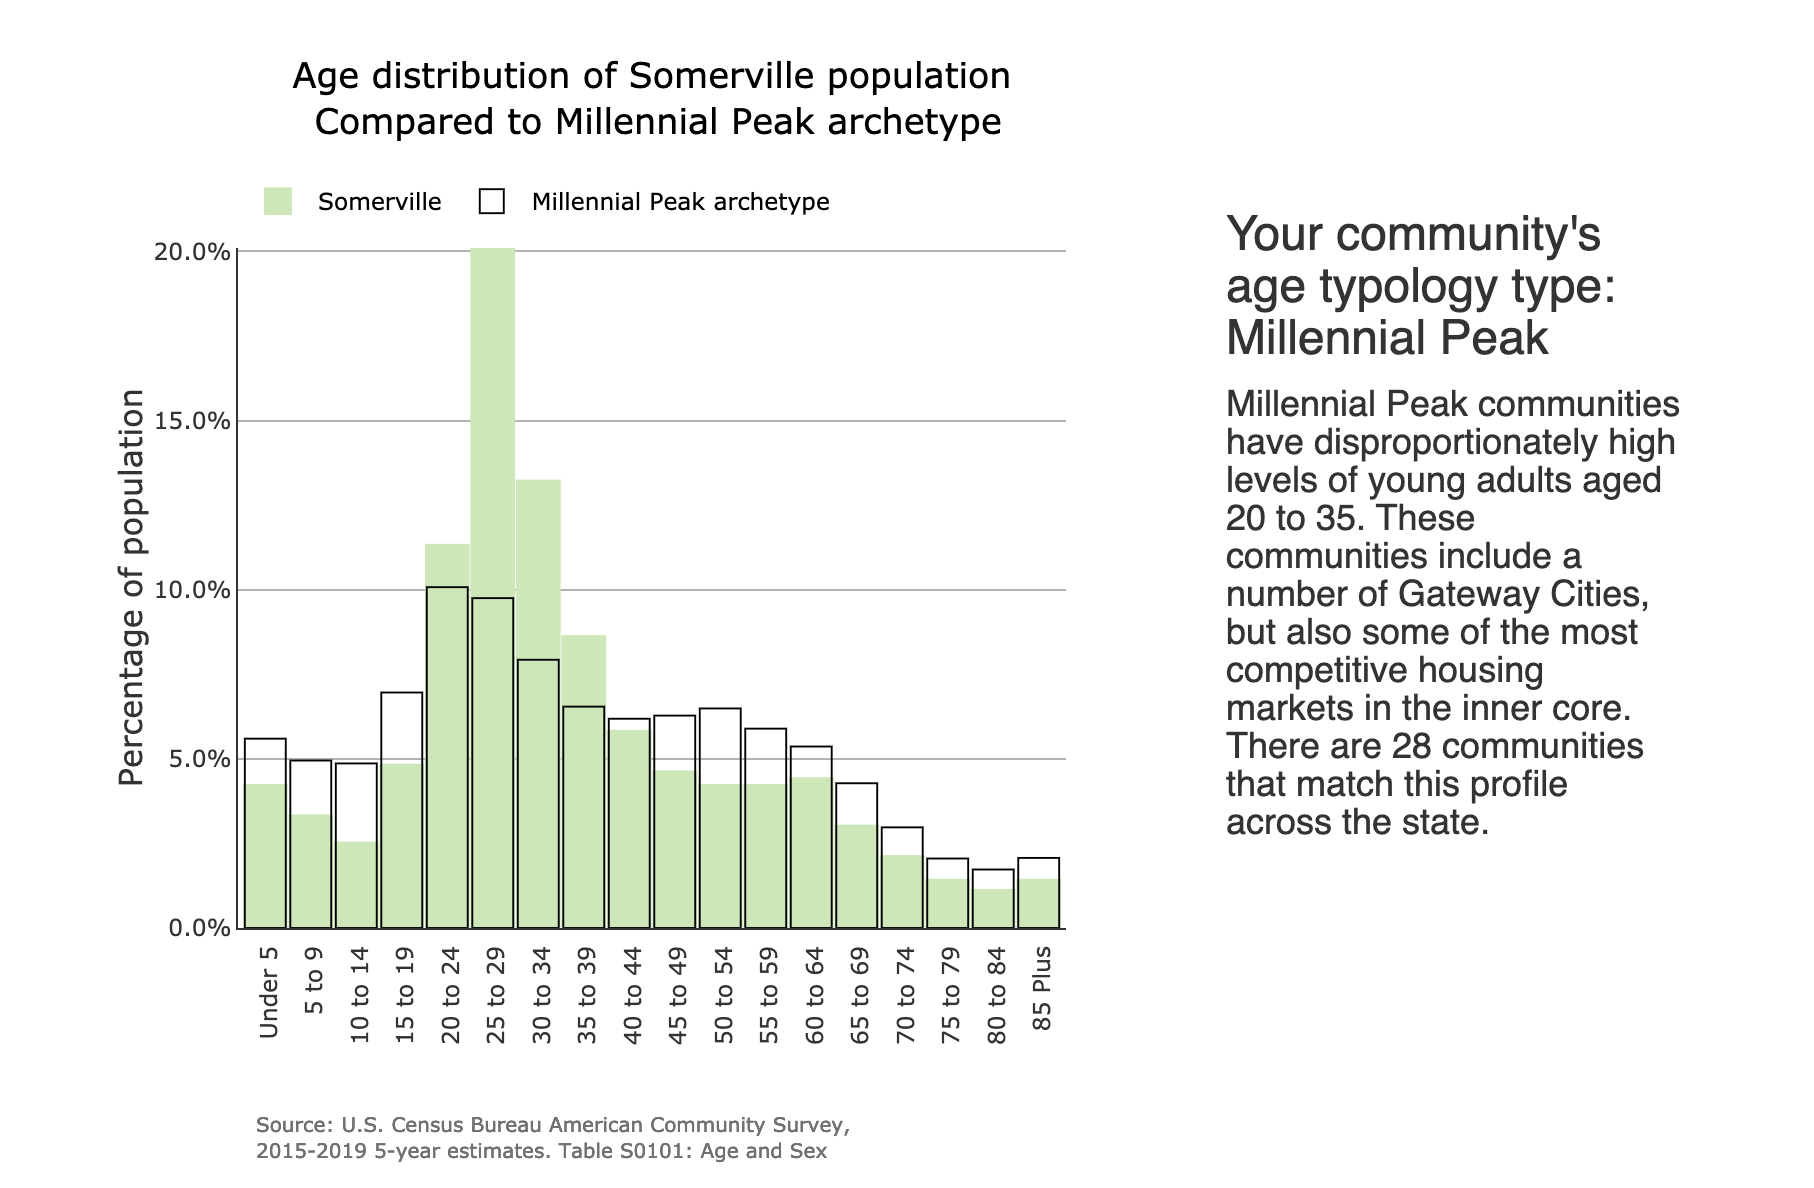 DataTown allows you to explore demographics on a town-by-town basis.